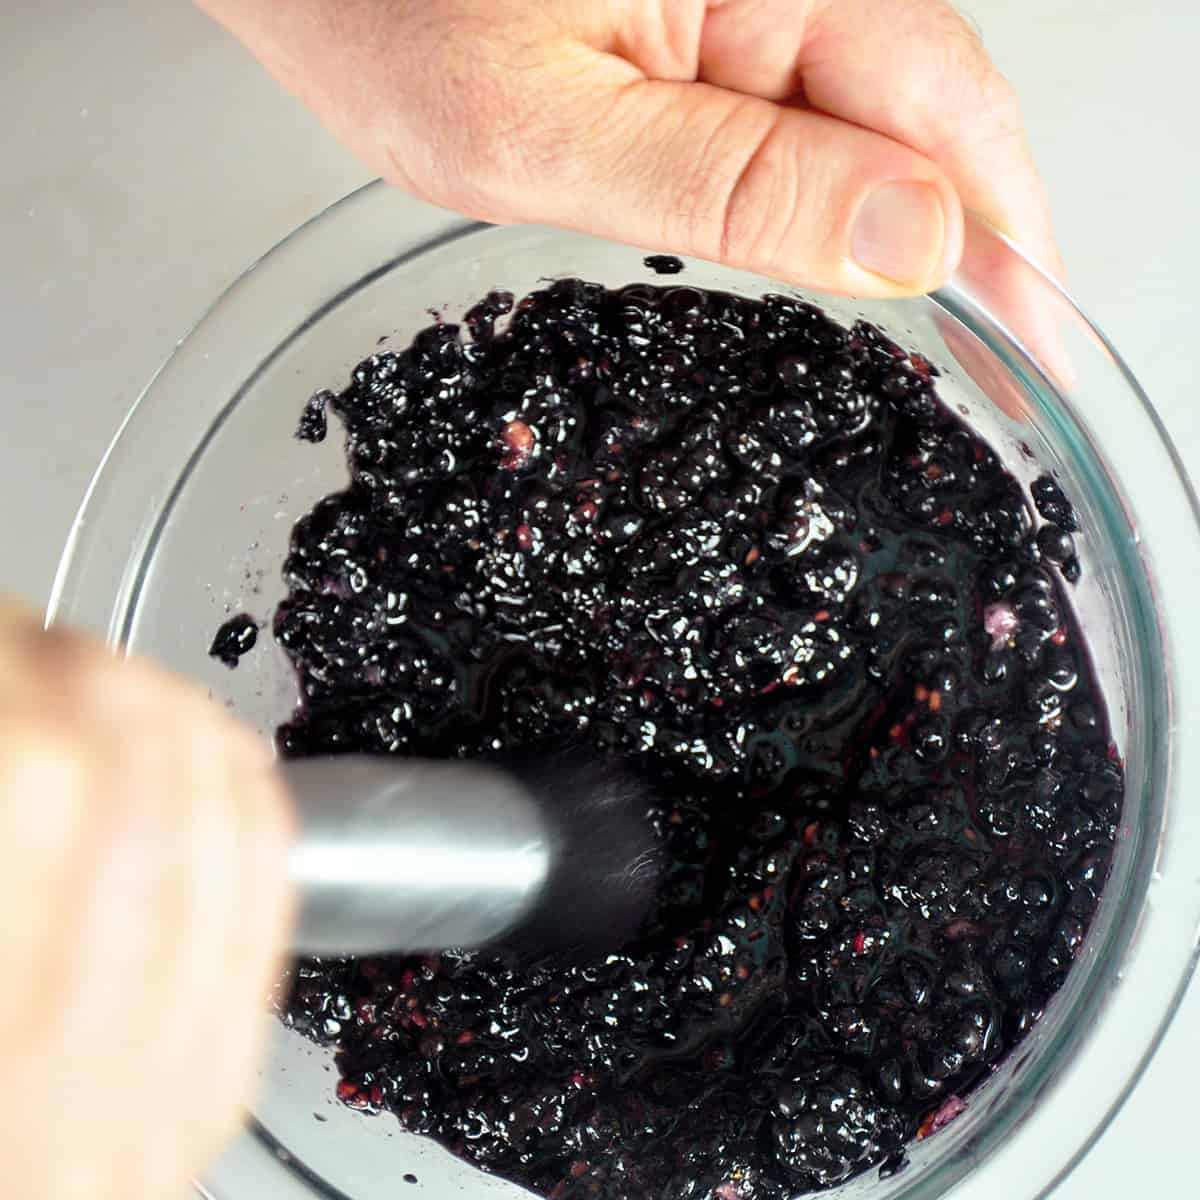 Using a tool to squish blackberries.